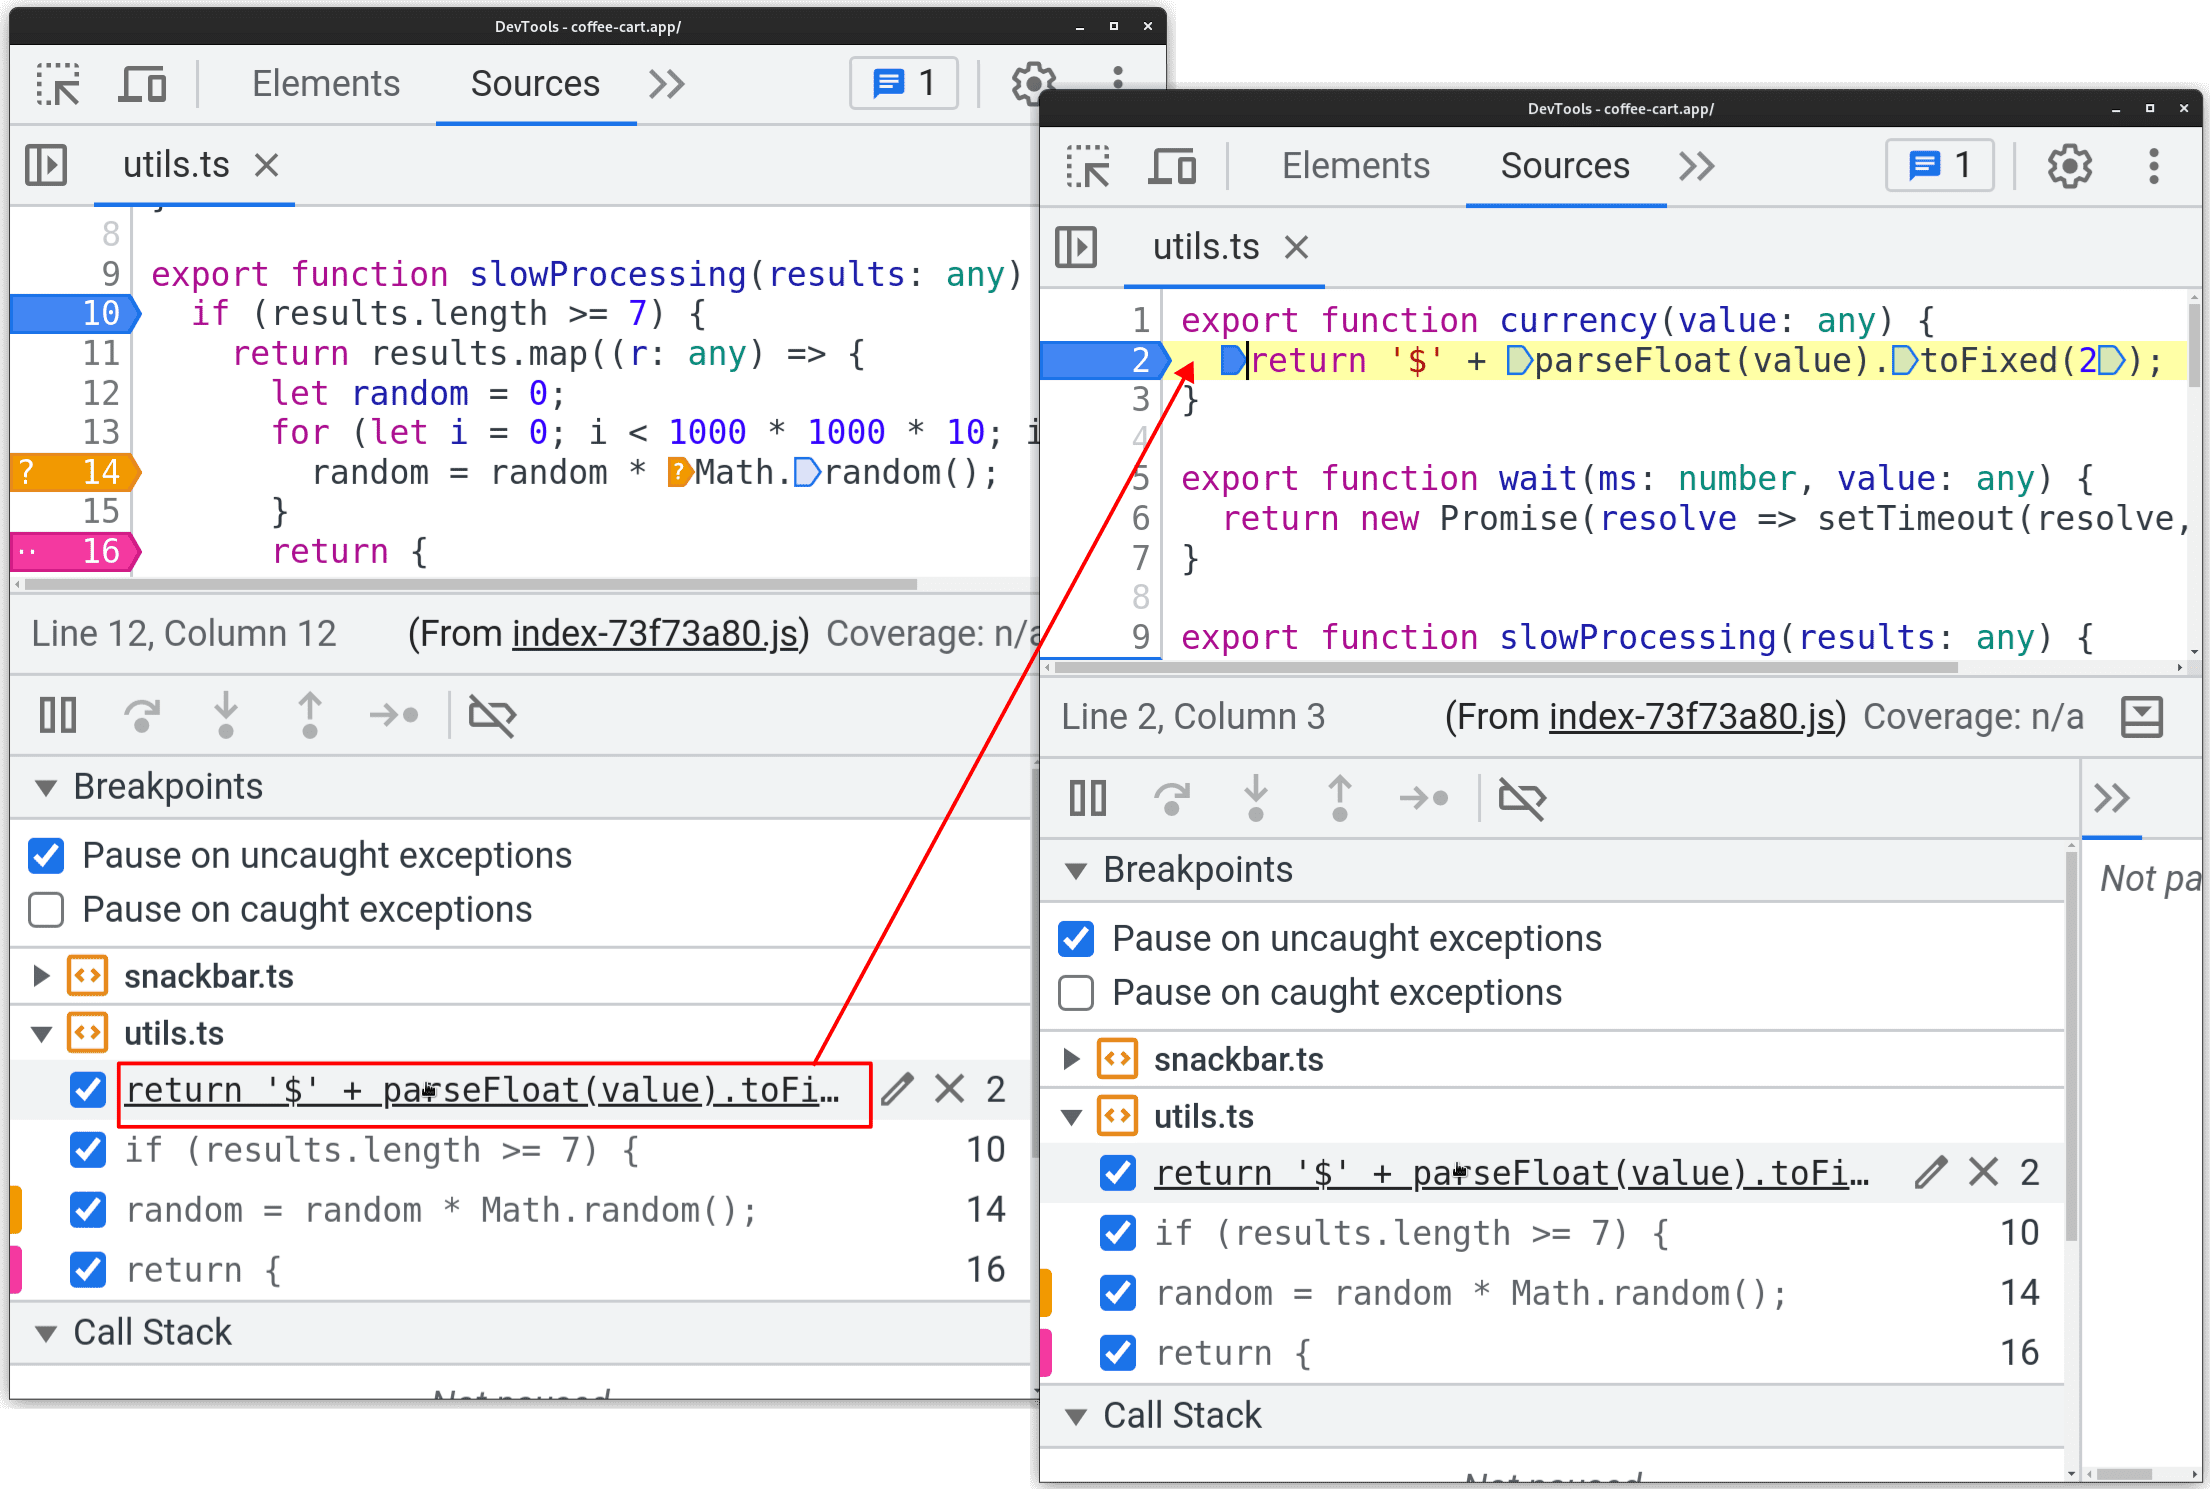 Jump to the source code location in the code editor.